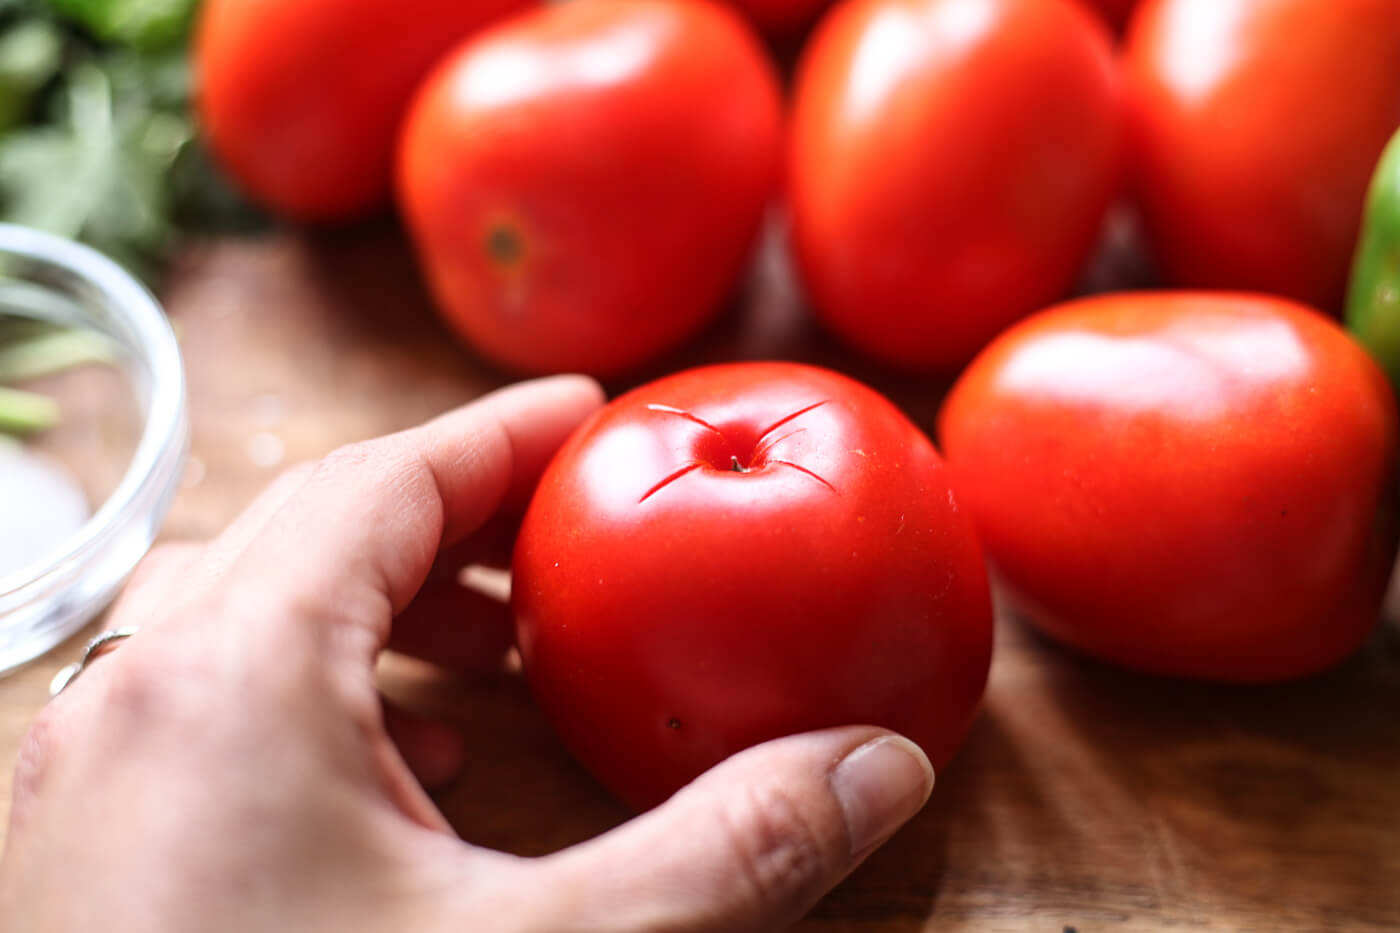 An x is cut into the bottom of a red tomato.